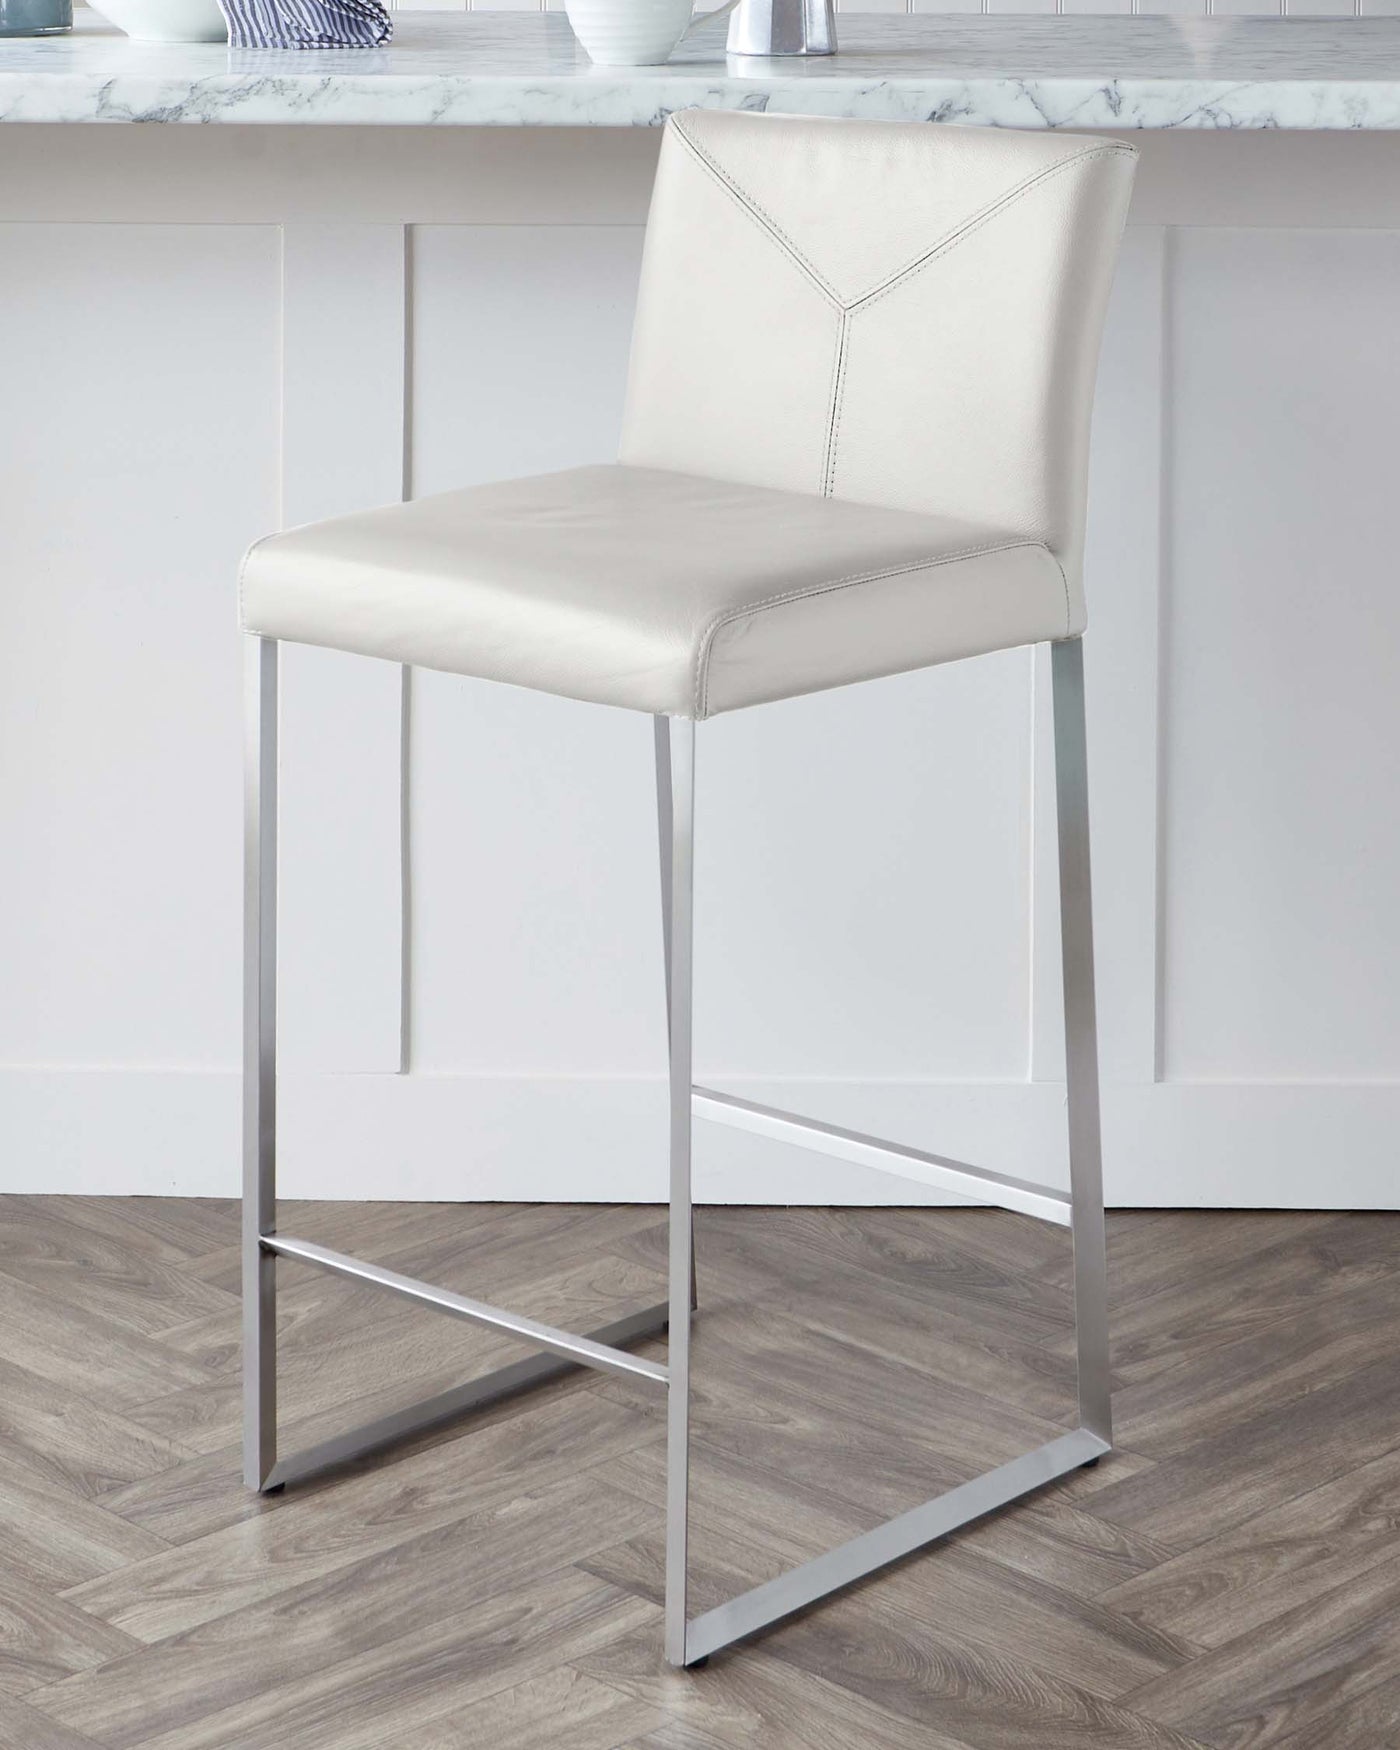 Modern bar stool with a light beige, leather-like upholstered seat and backrest, featuring a geometric stitch pattern on the back, complemented by a sleek chrome-finished metal frame with a simple footrest.